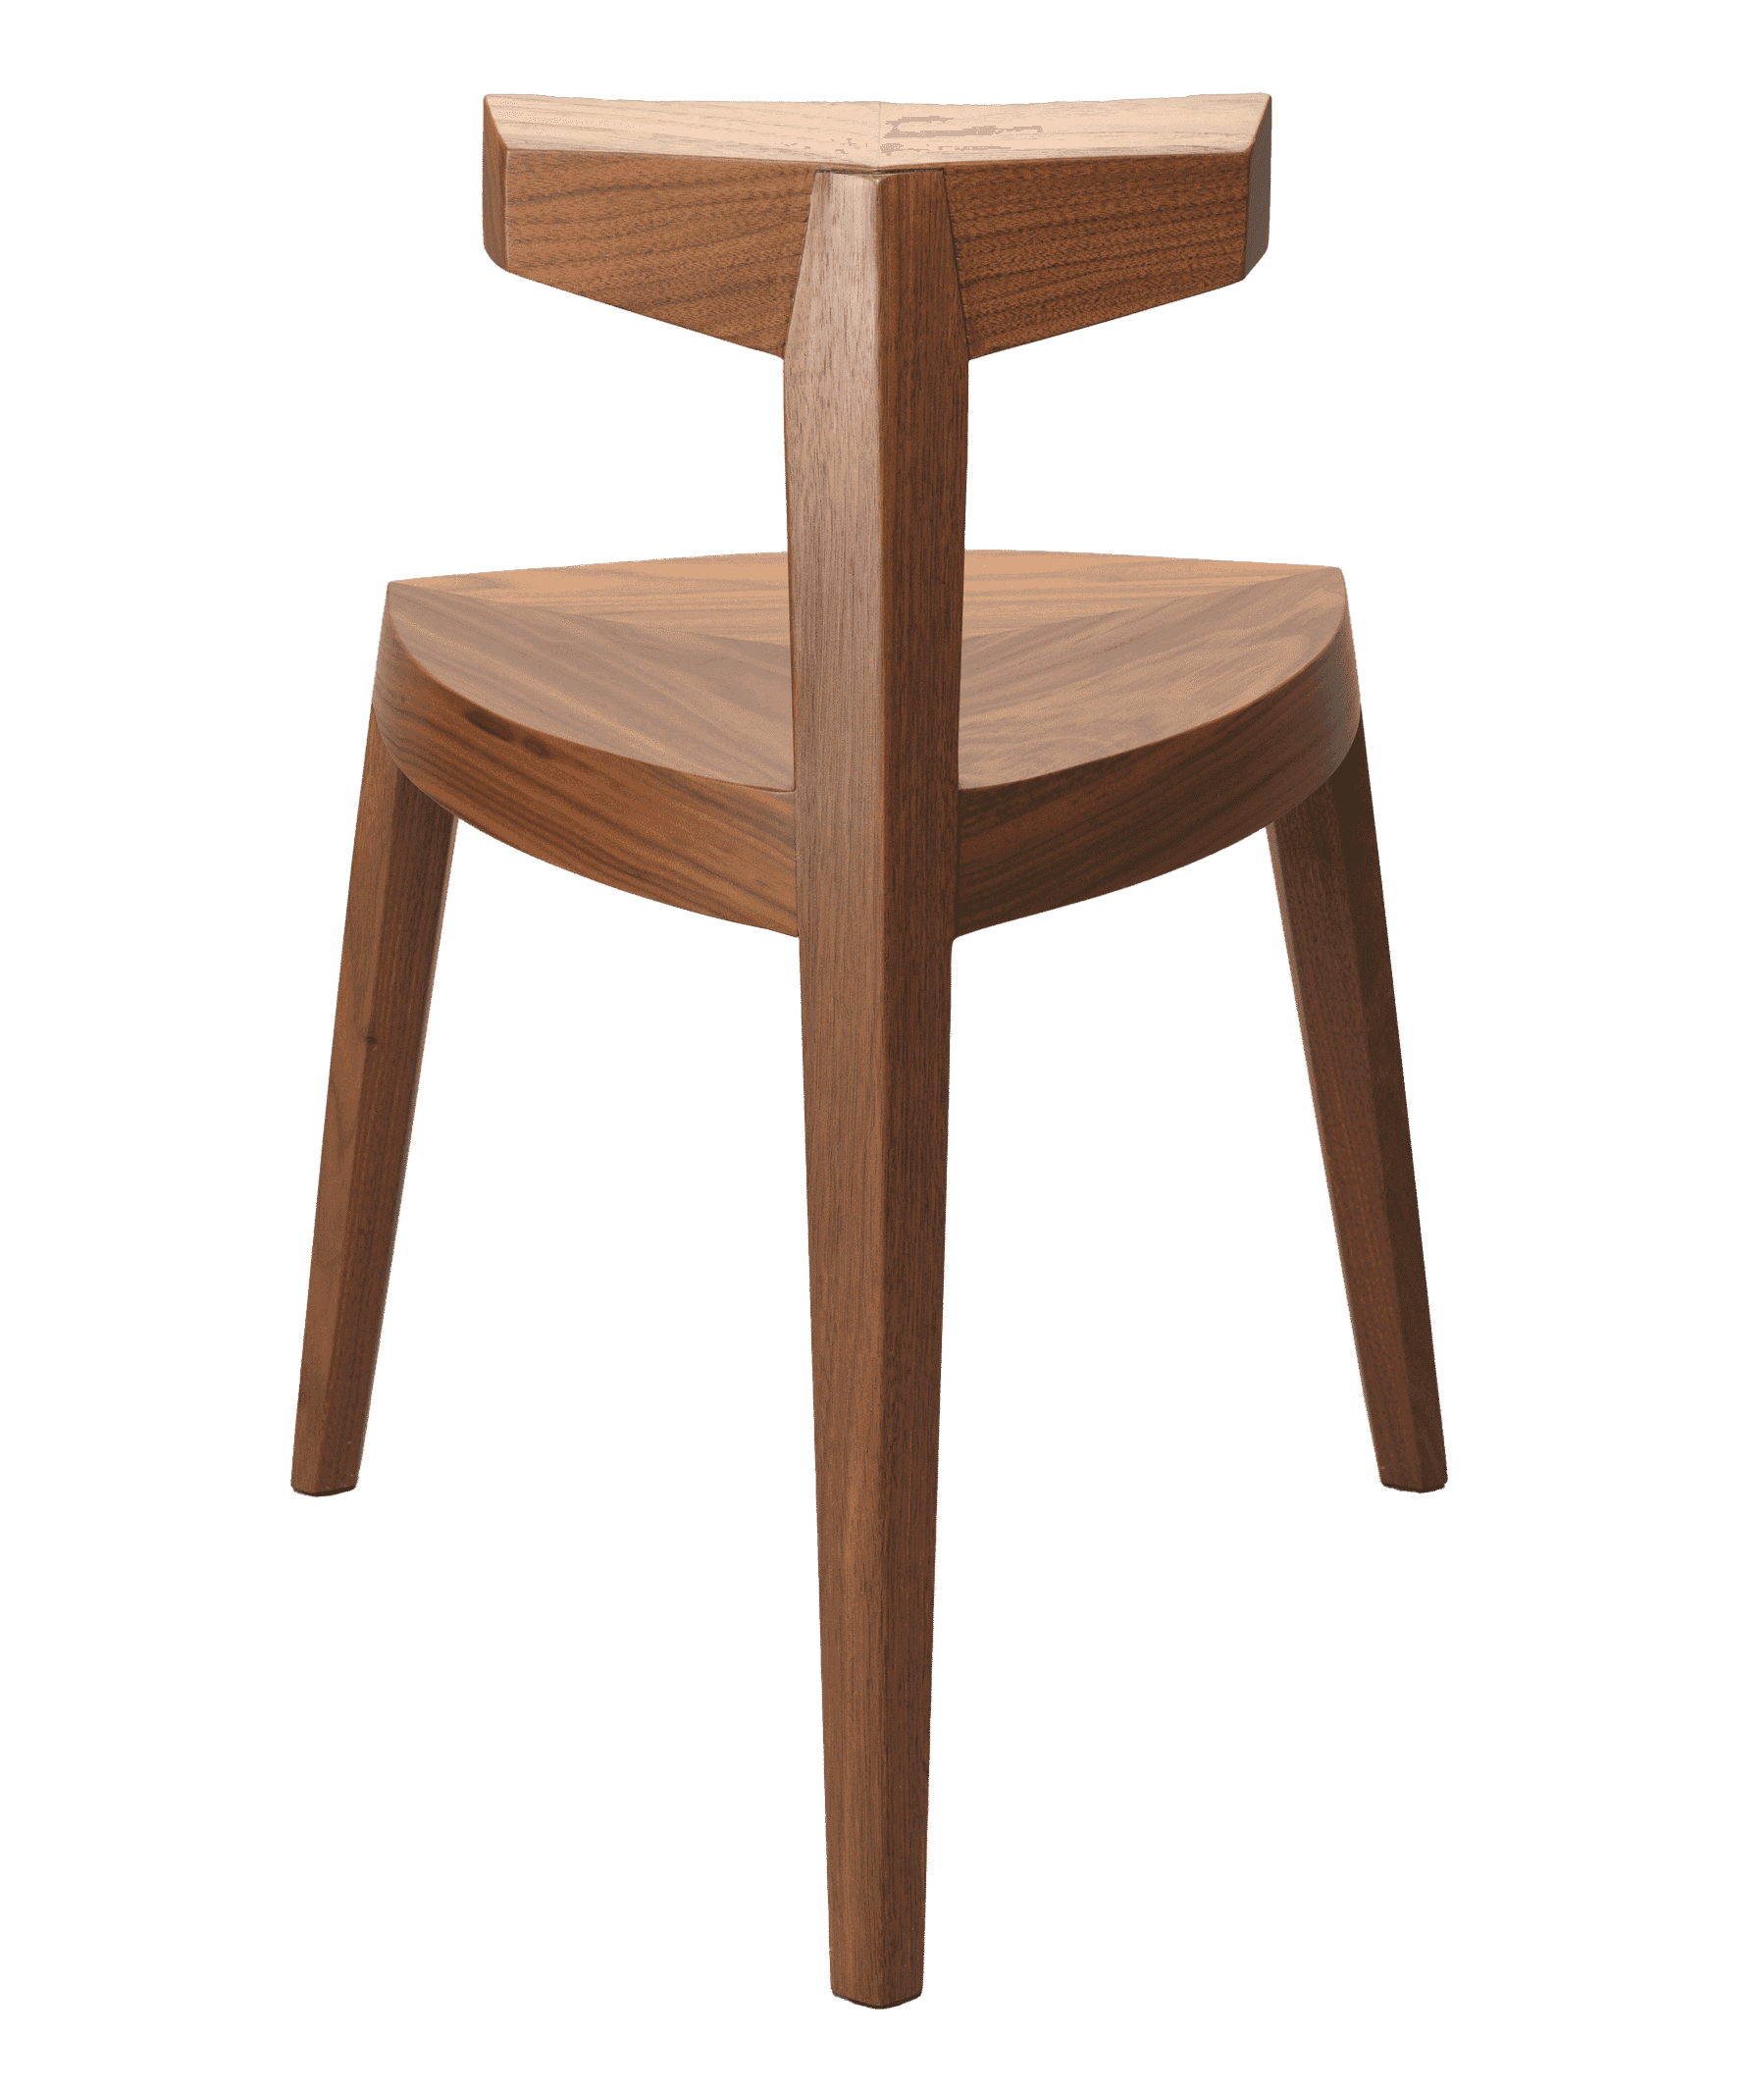 Three- legged chair made of walnut wood.  The chair has a T-shaped backrest.